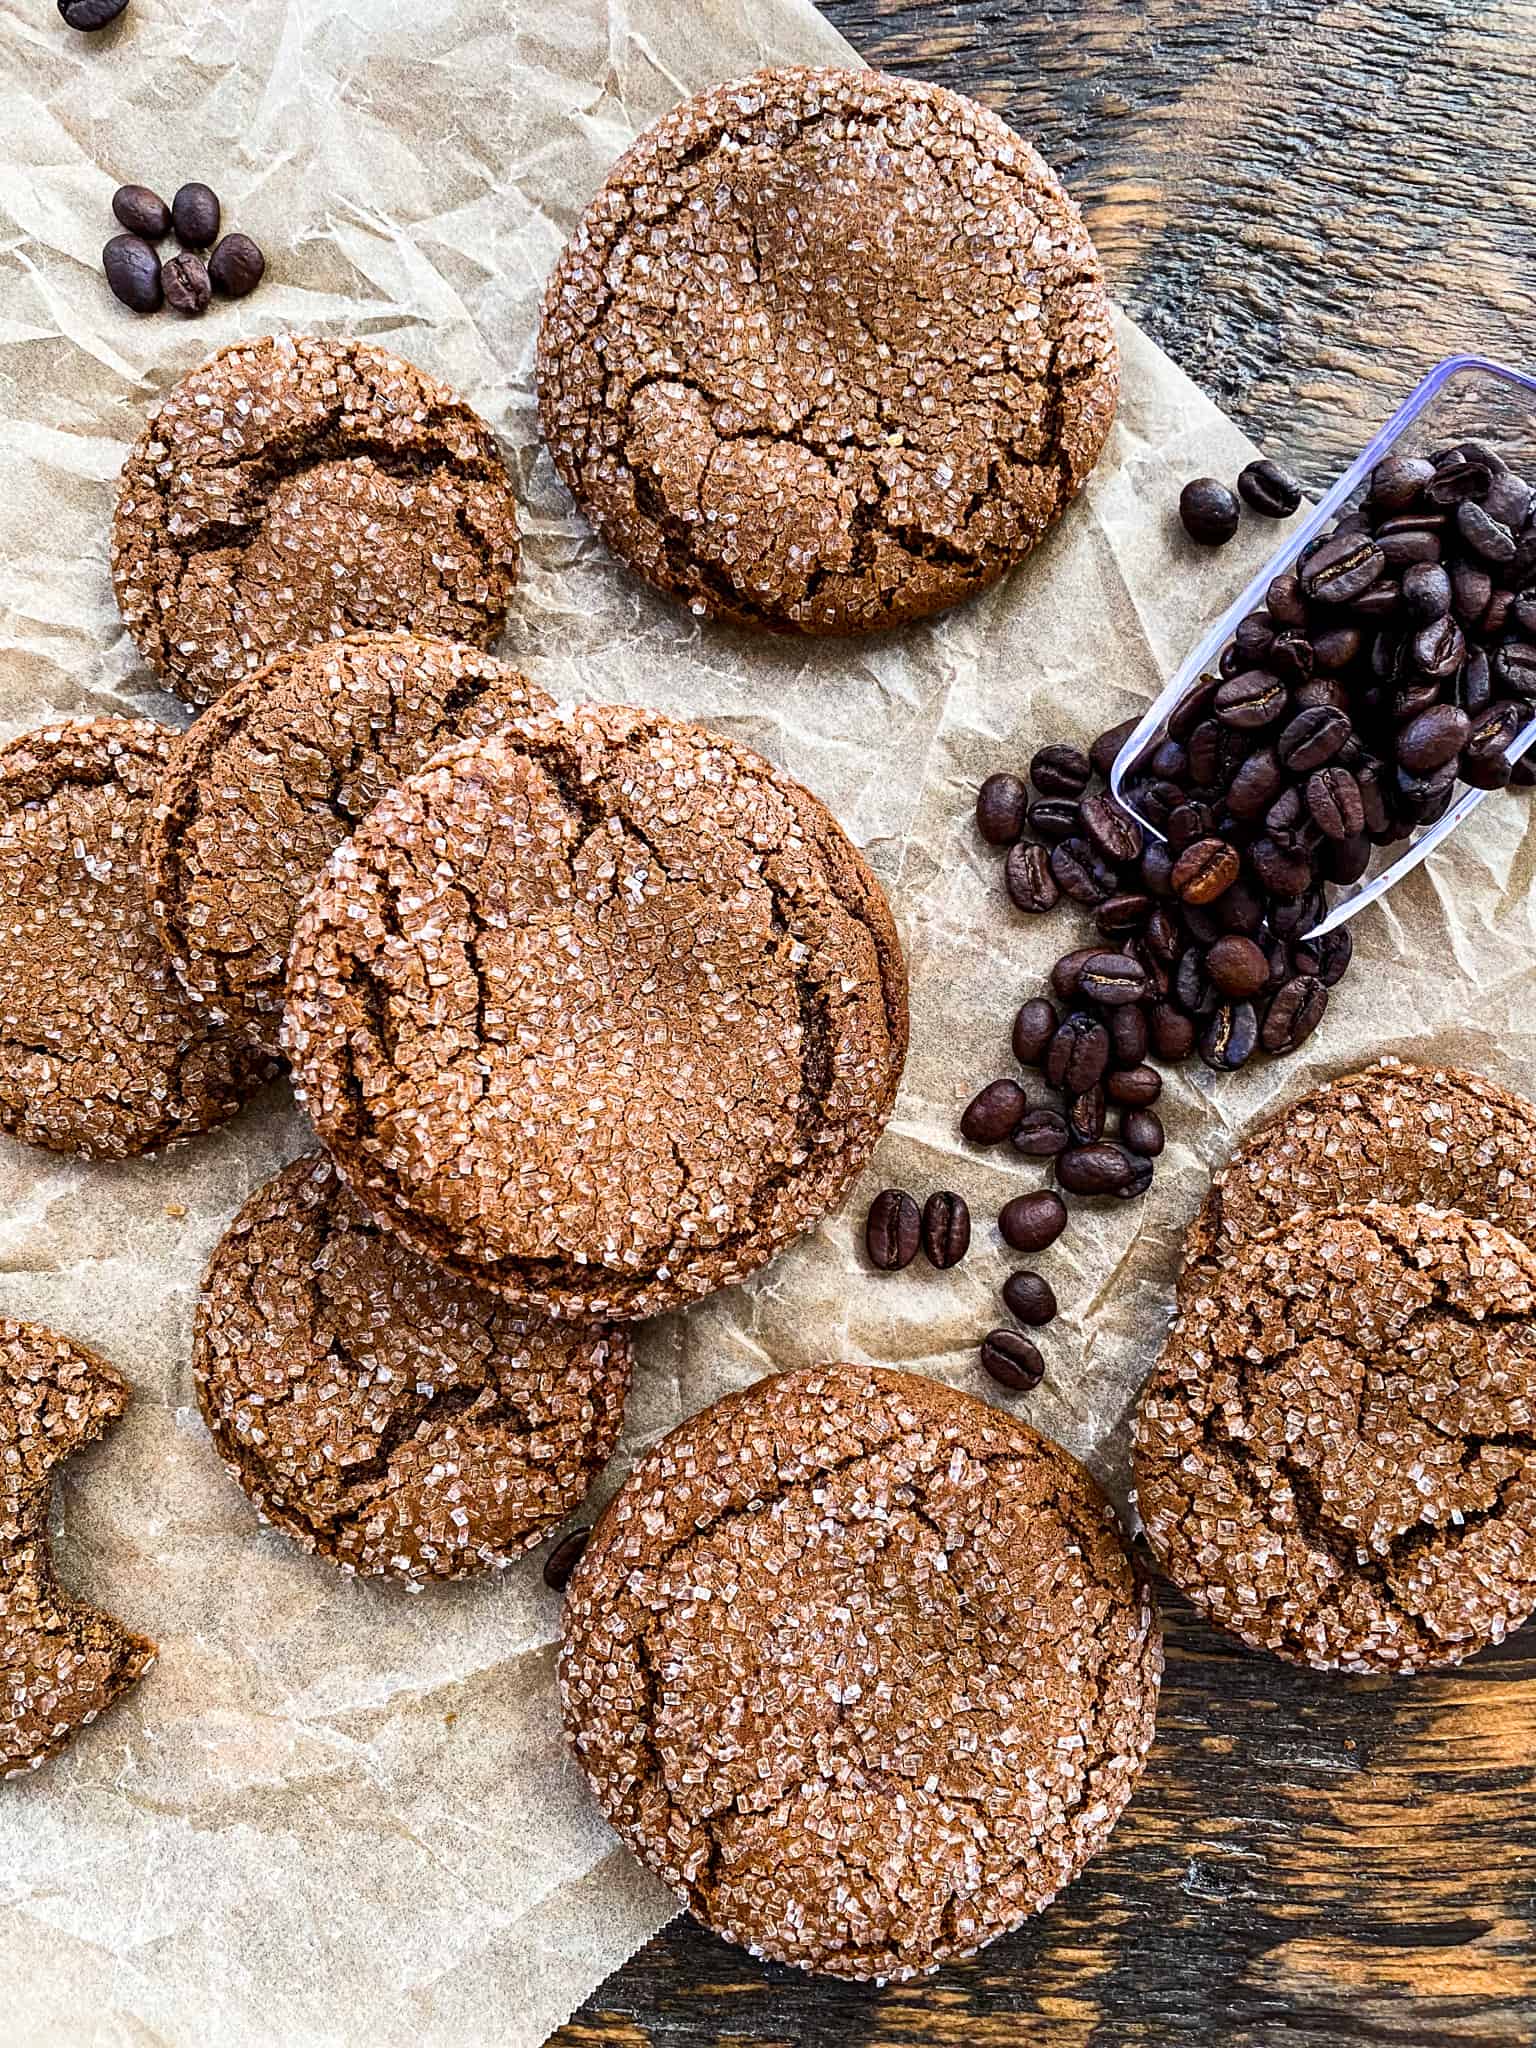 Overhead view of espresso cookies with coffee beans spilling out onto parchment paper. Lots of big cookies coated in fancy sugar, boasting large cracked tops and moist insides.